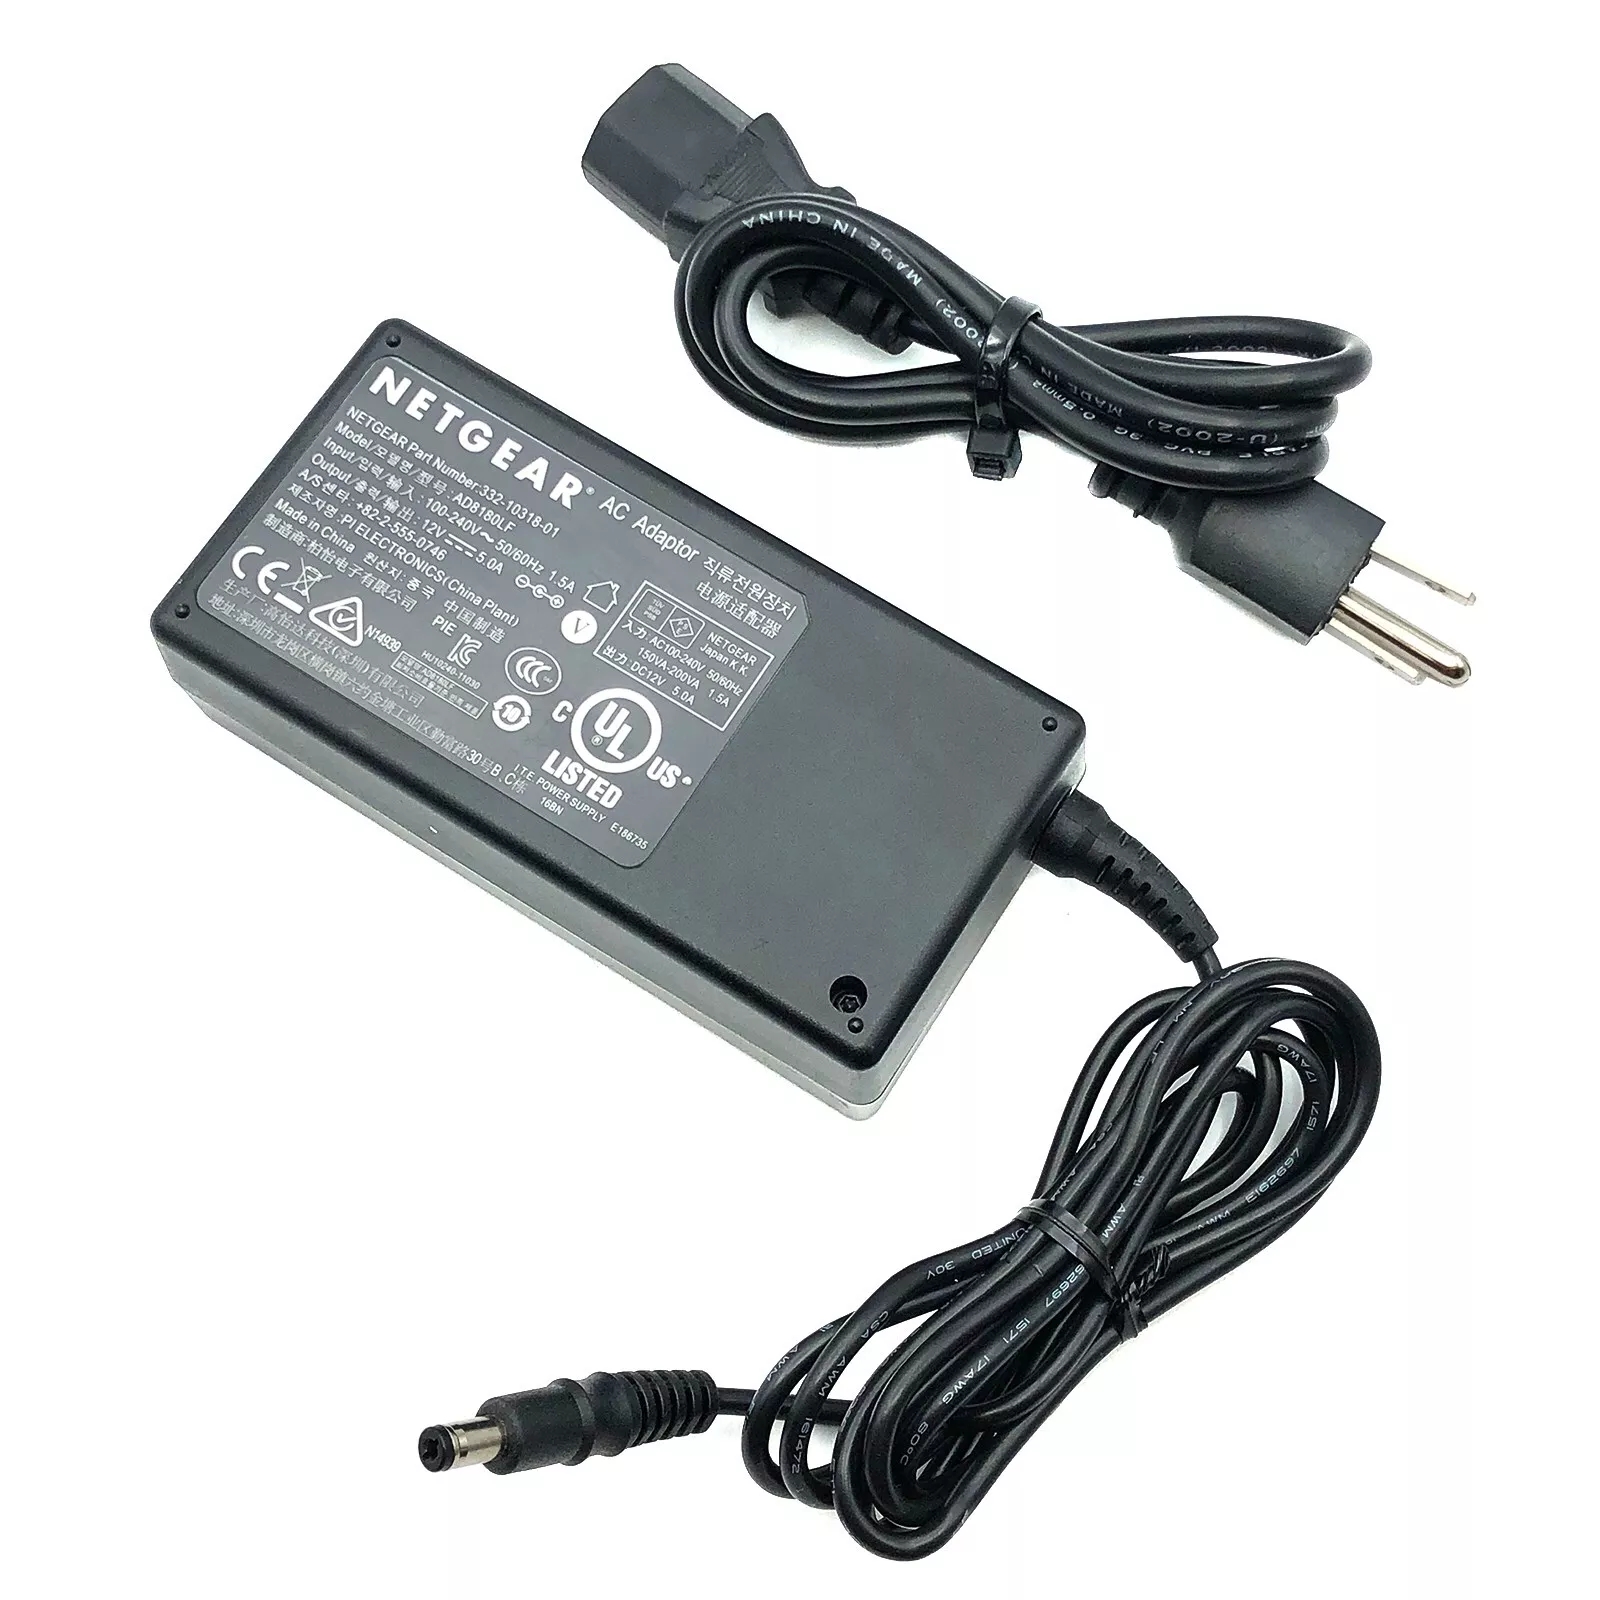 *Brand NEW*Geniune Netgear 12V 5A 60W AC Adapter for WNDR4500 WiFi Router Power Supply